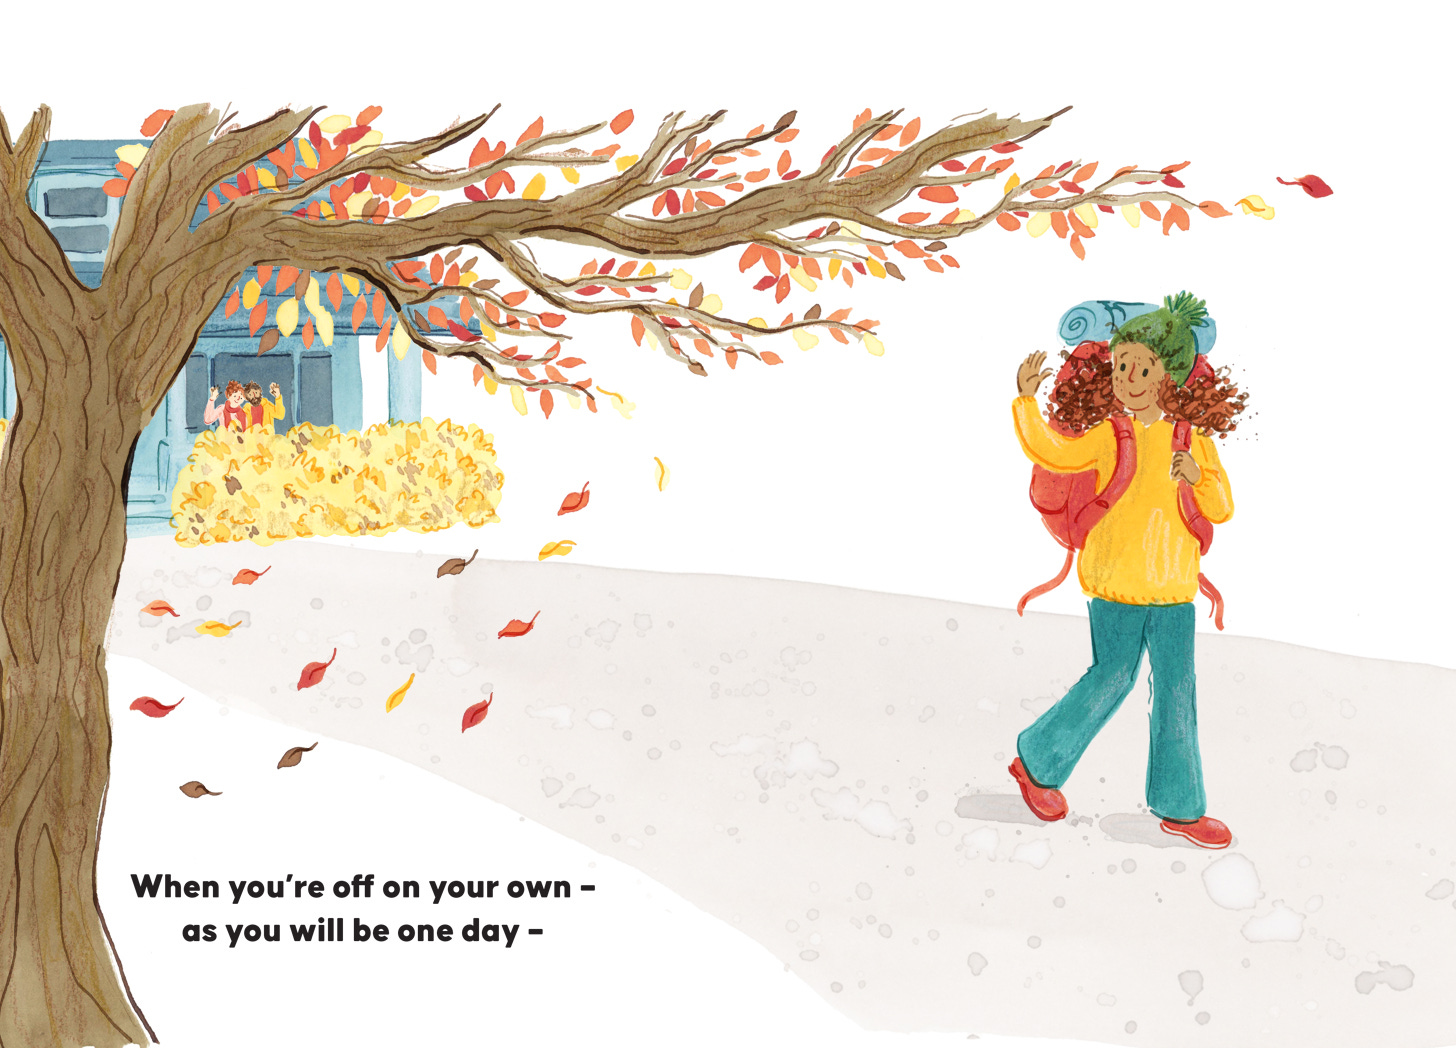 Illustration of a young adult girl leaving home, waving to her parents. Illustration by Nanette Regan from It's Your Time to Shine by Dianne White